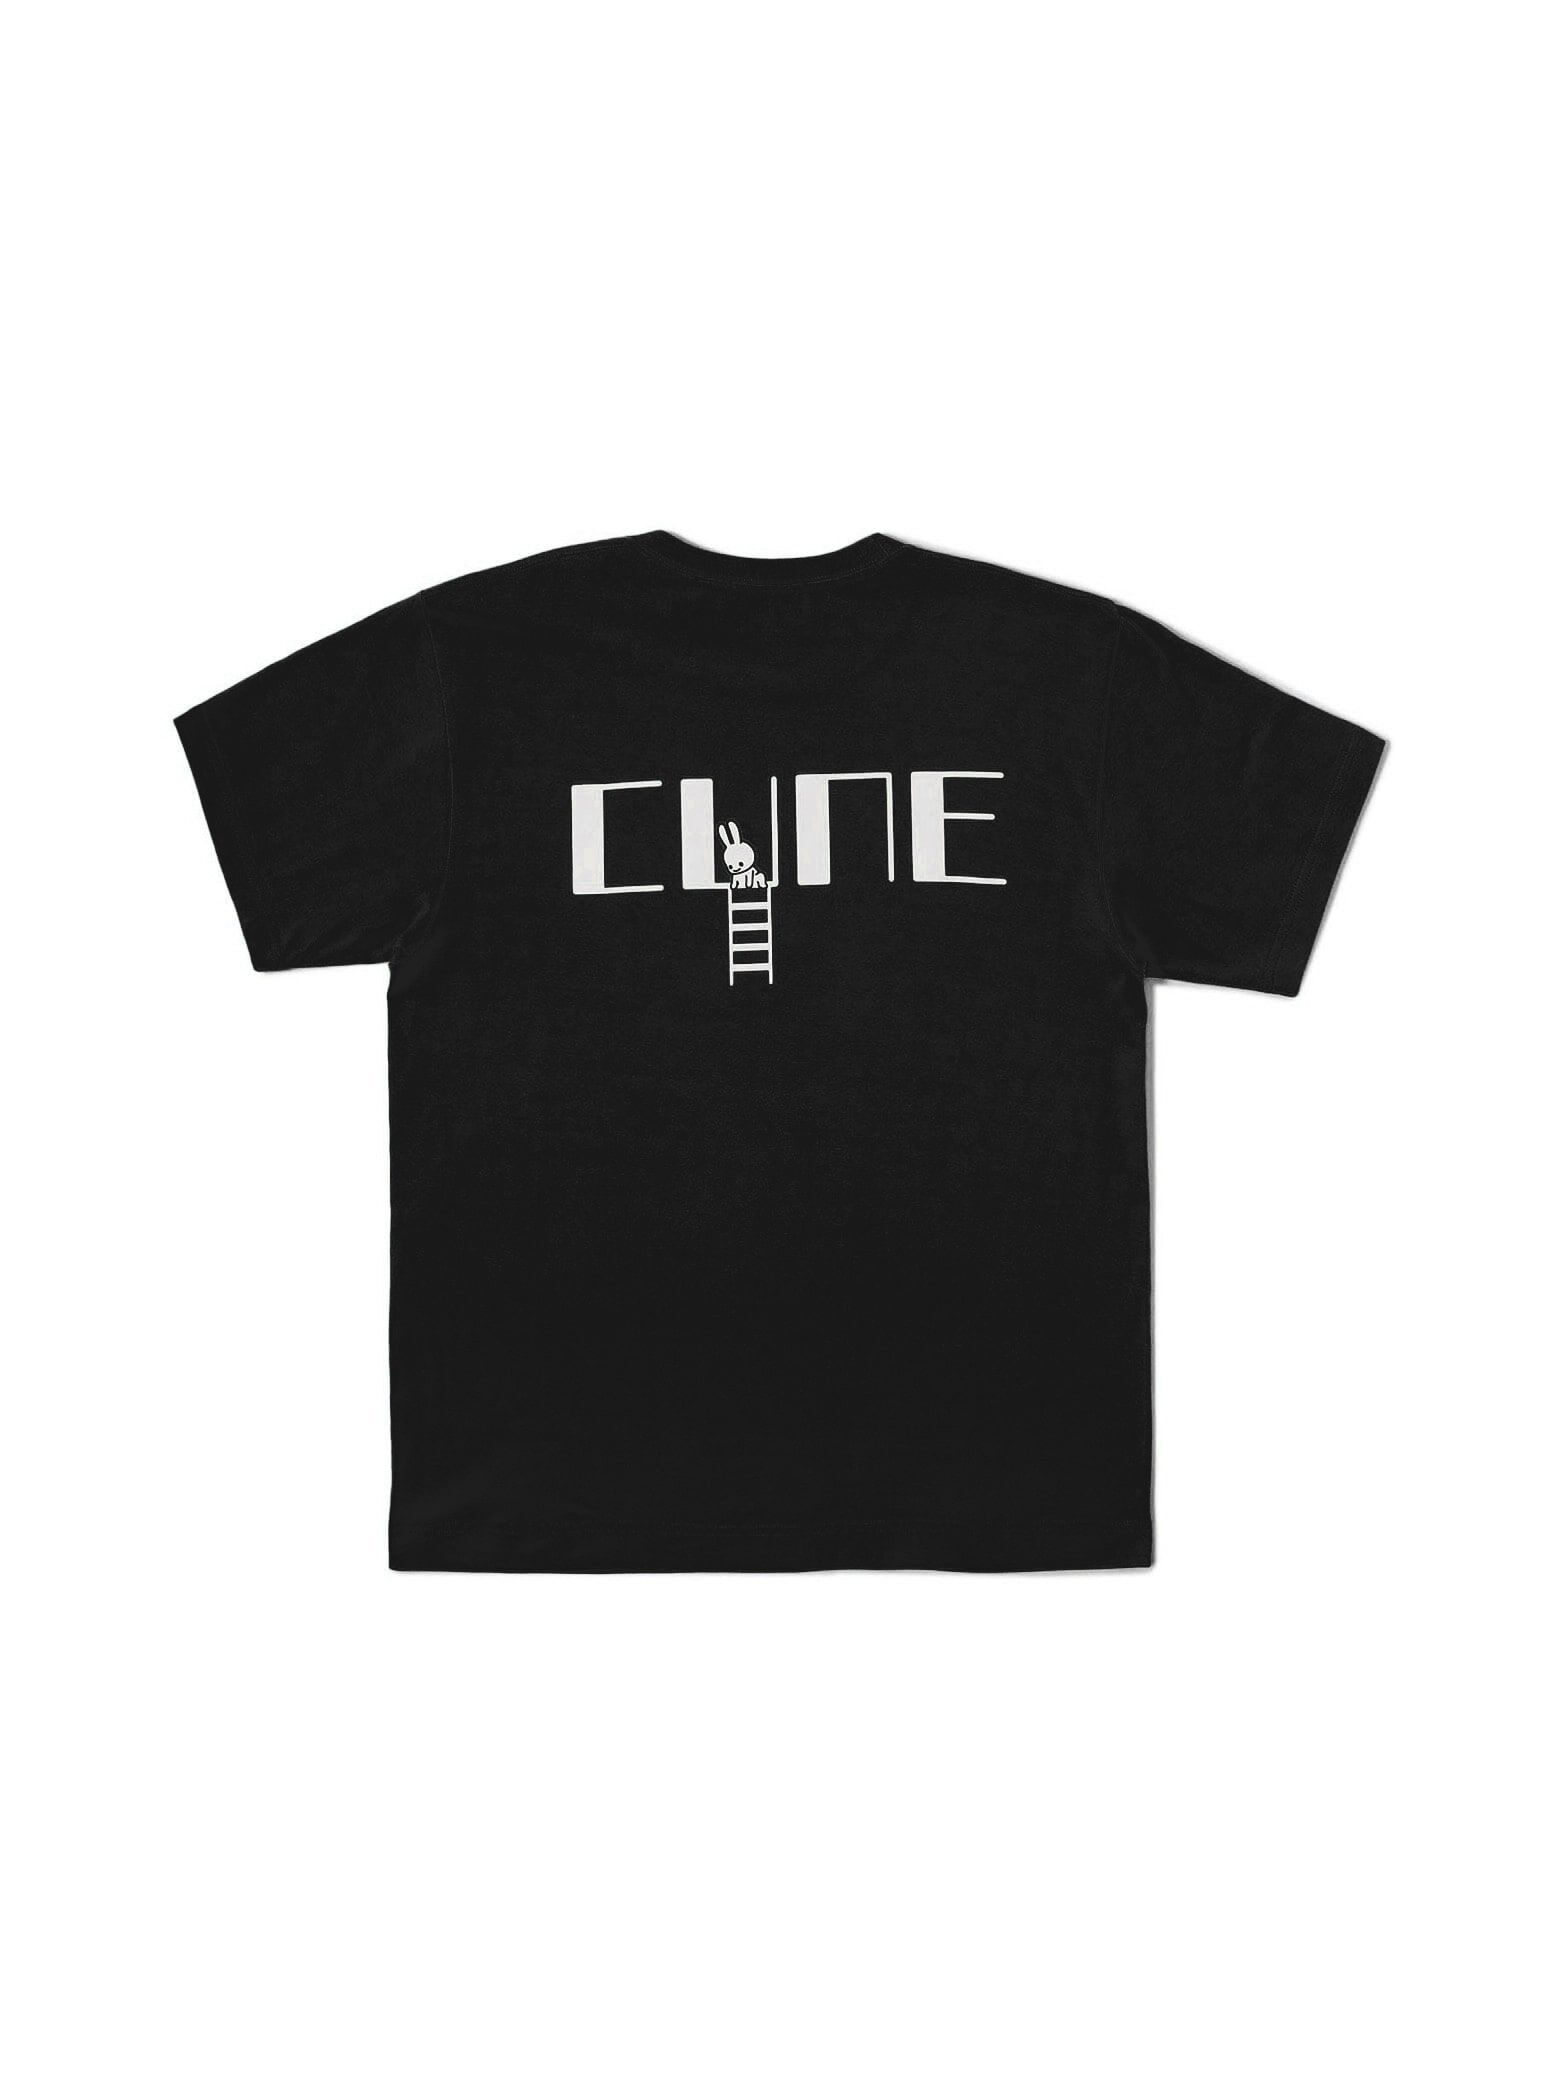 CUNE T-SHIRTS | CUNE Official Global Online Store